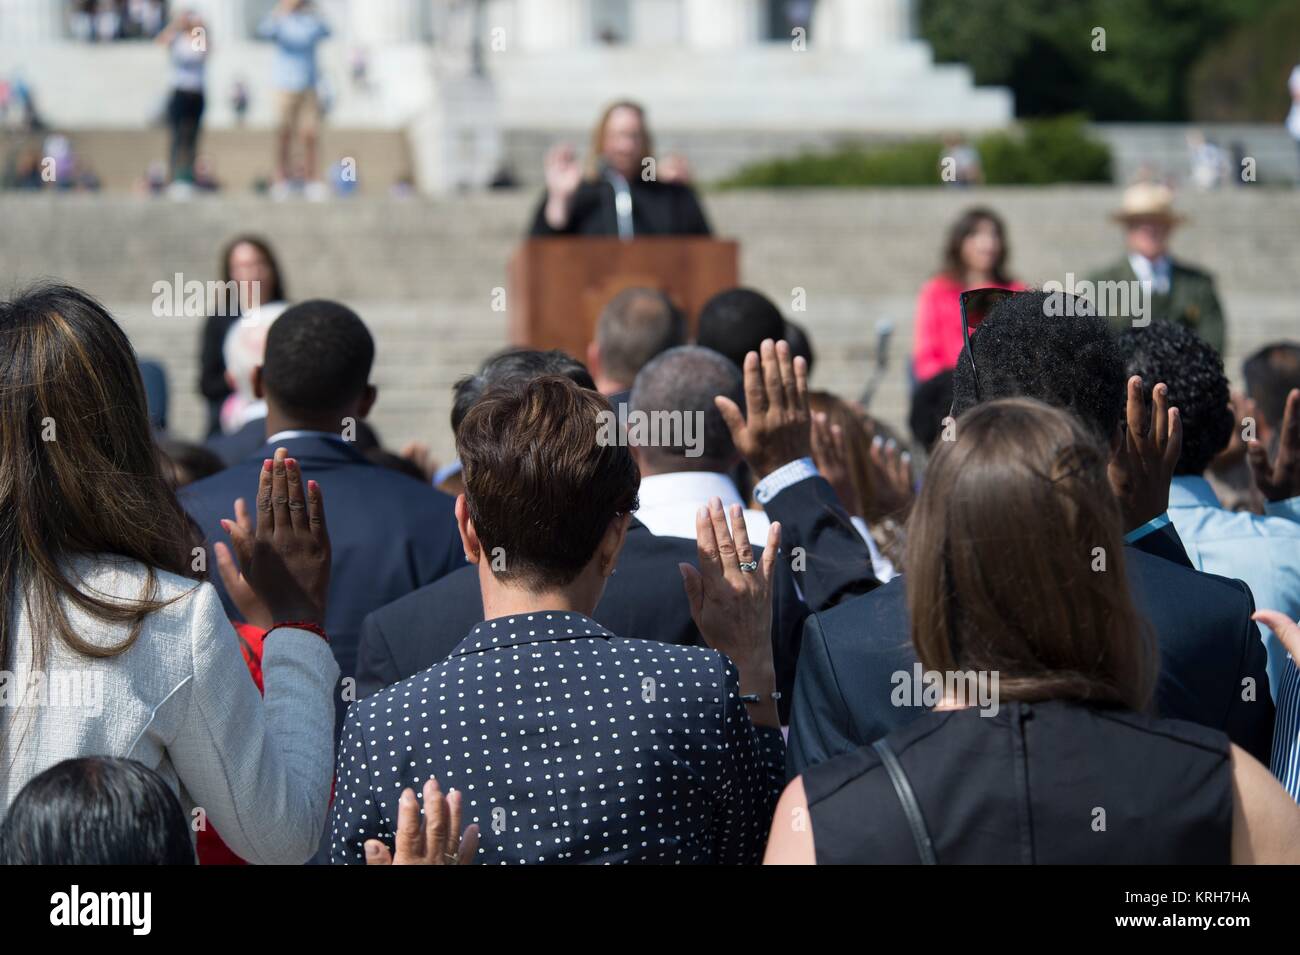 U.S. District Court for the District of Columbia Chief Judge The Honorable Beryl A. Howell swears in new U.S. citizens during a naturalization ceremony at the Lincoln Memorial September 16, 2016 in Washington, DC. Stock Photo